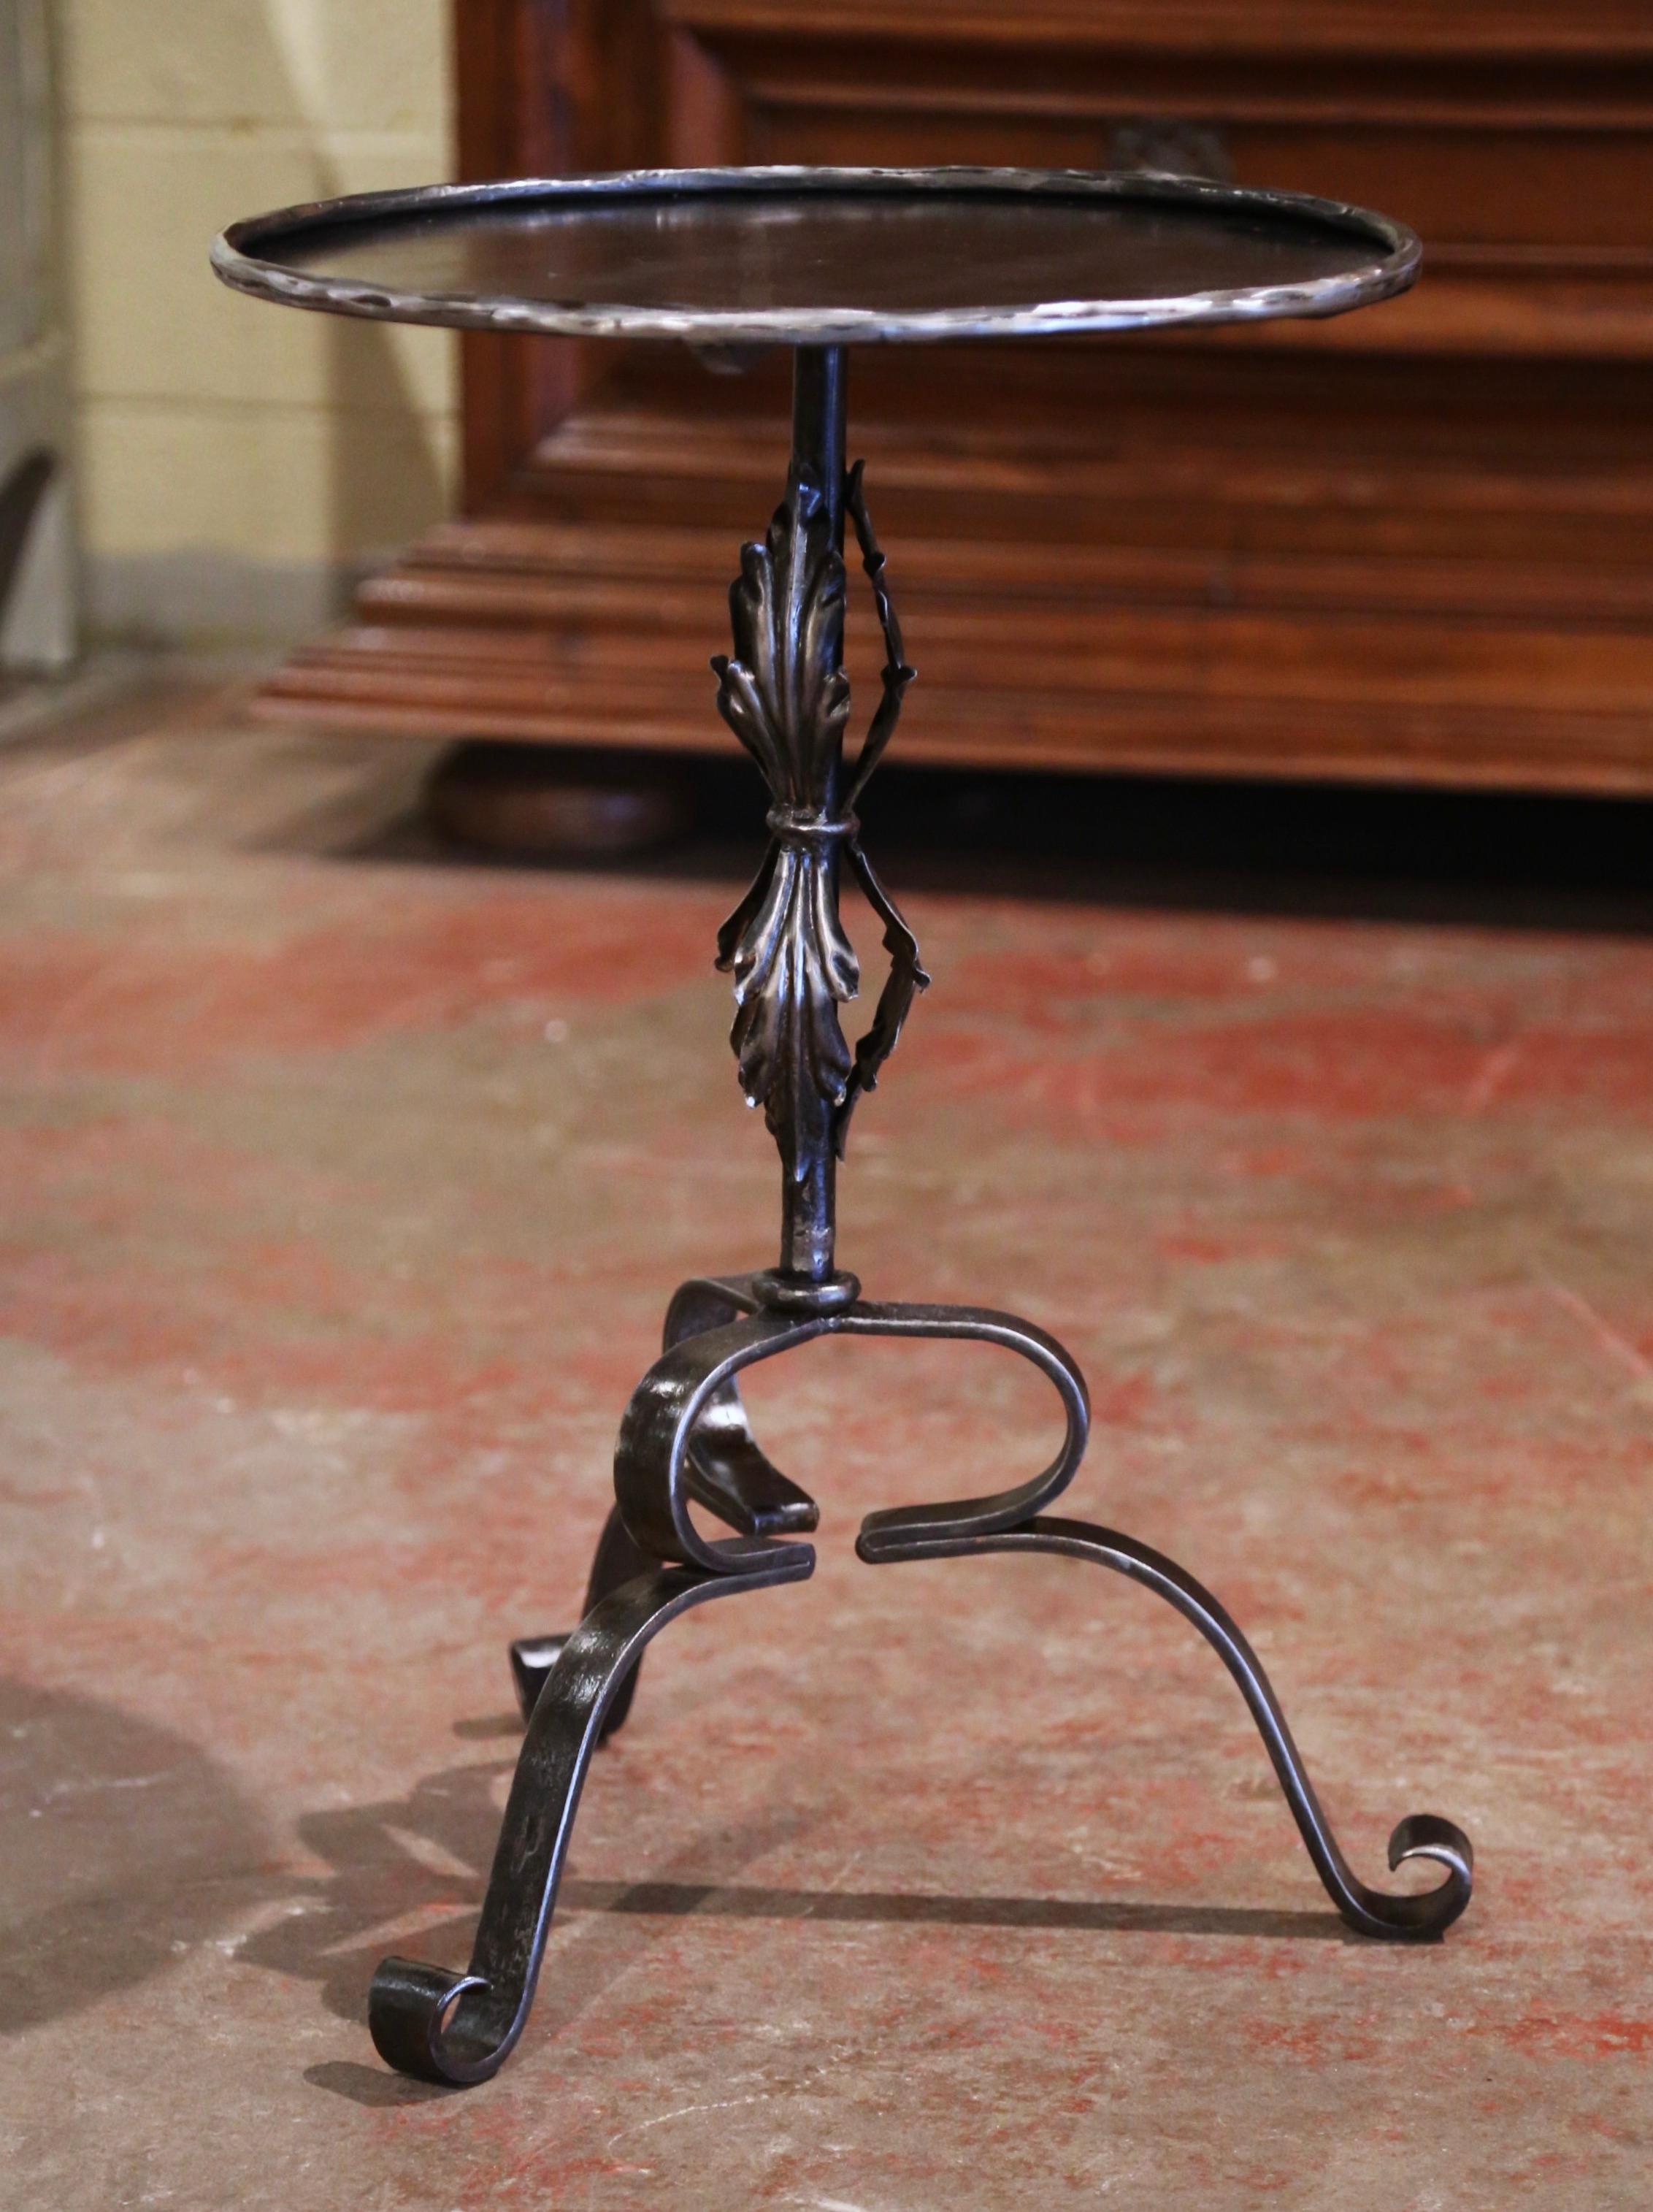 This elegant, antique Gothic pedestal table was crafted in Southern France, circa 1920. The intricate martini table stands on three forged curved legs ending with scrolled feet, over a central pedestal stem embellished with acanthus leaf motifs. The